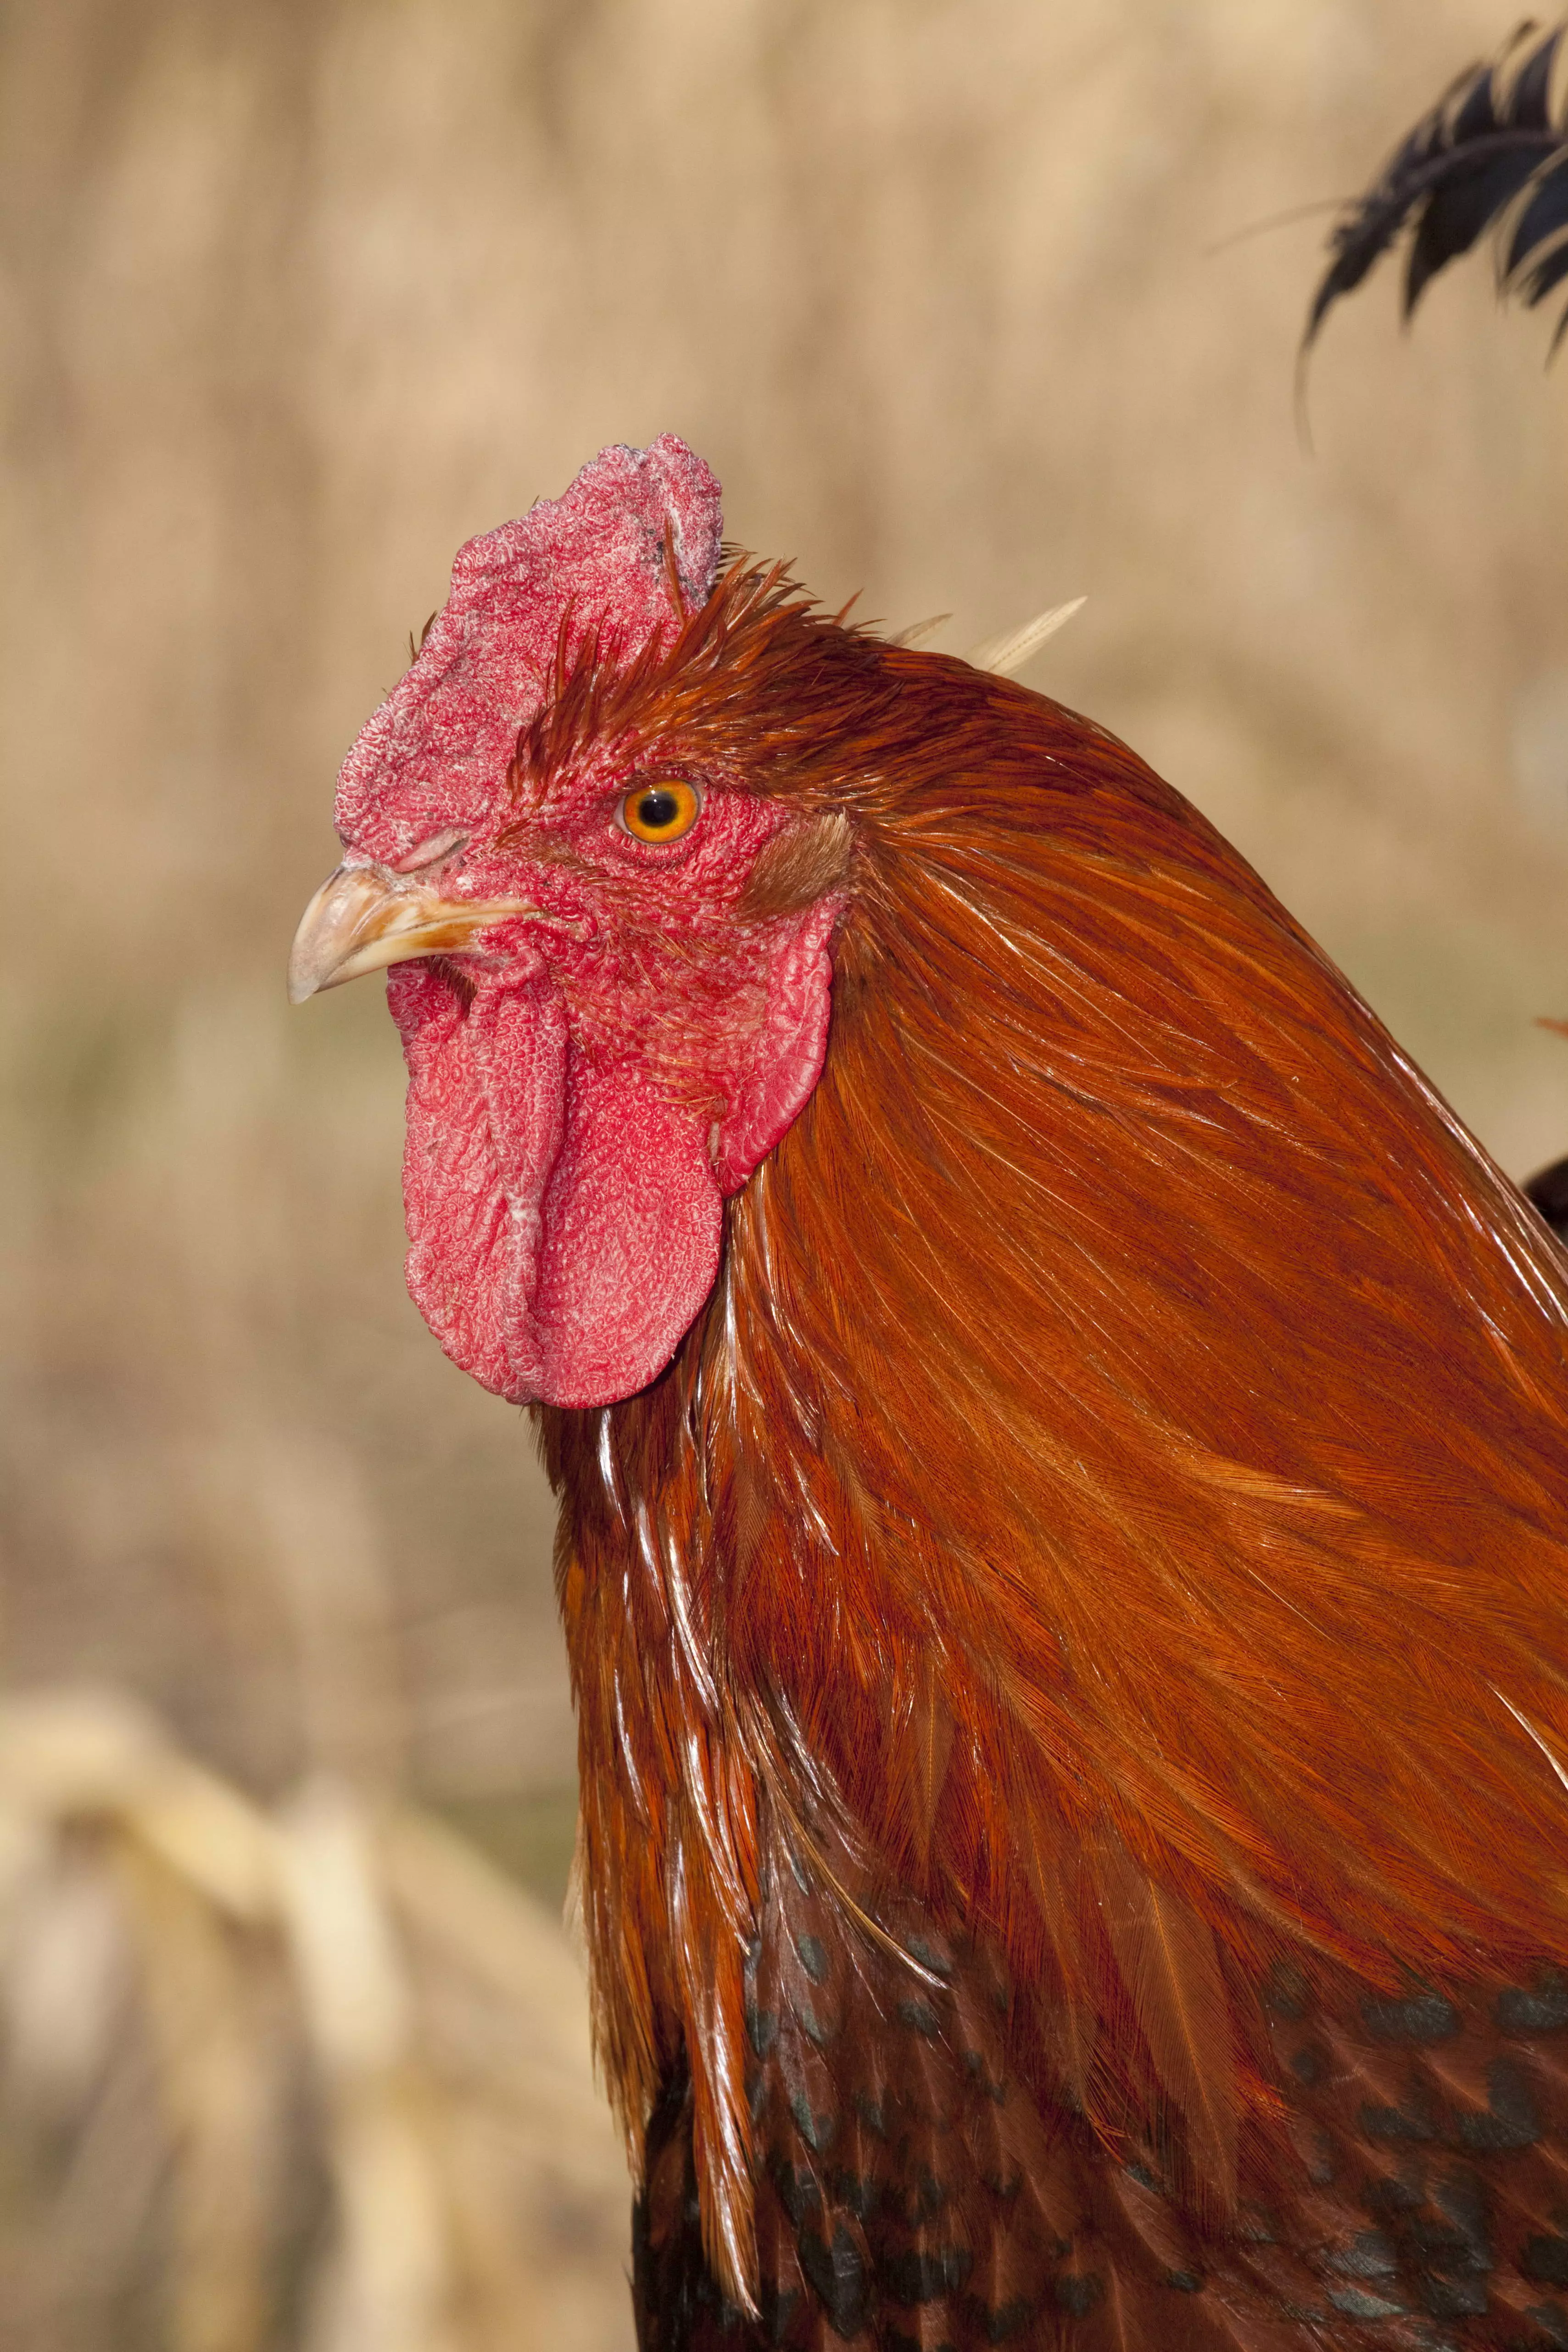 The elderly woman was attacked by her rooster while collecting eggs.